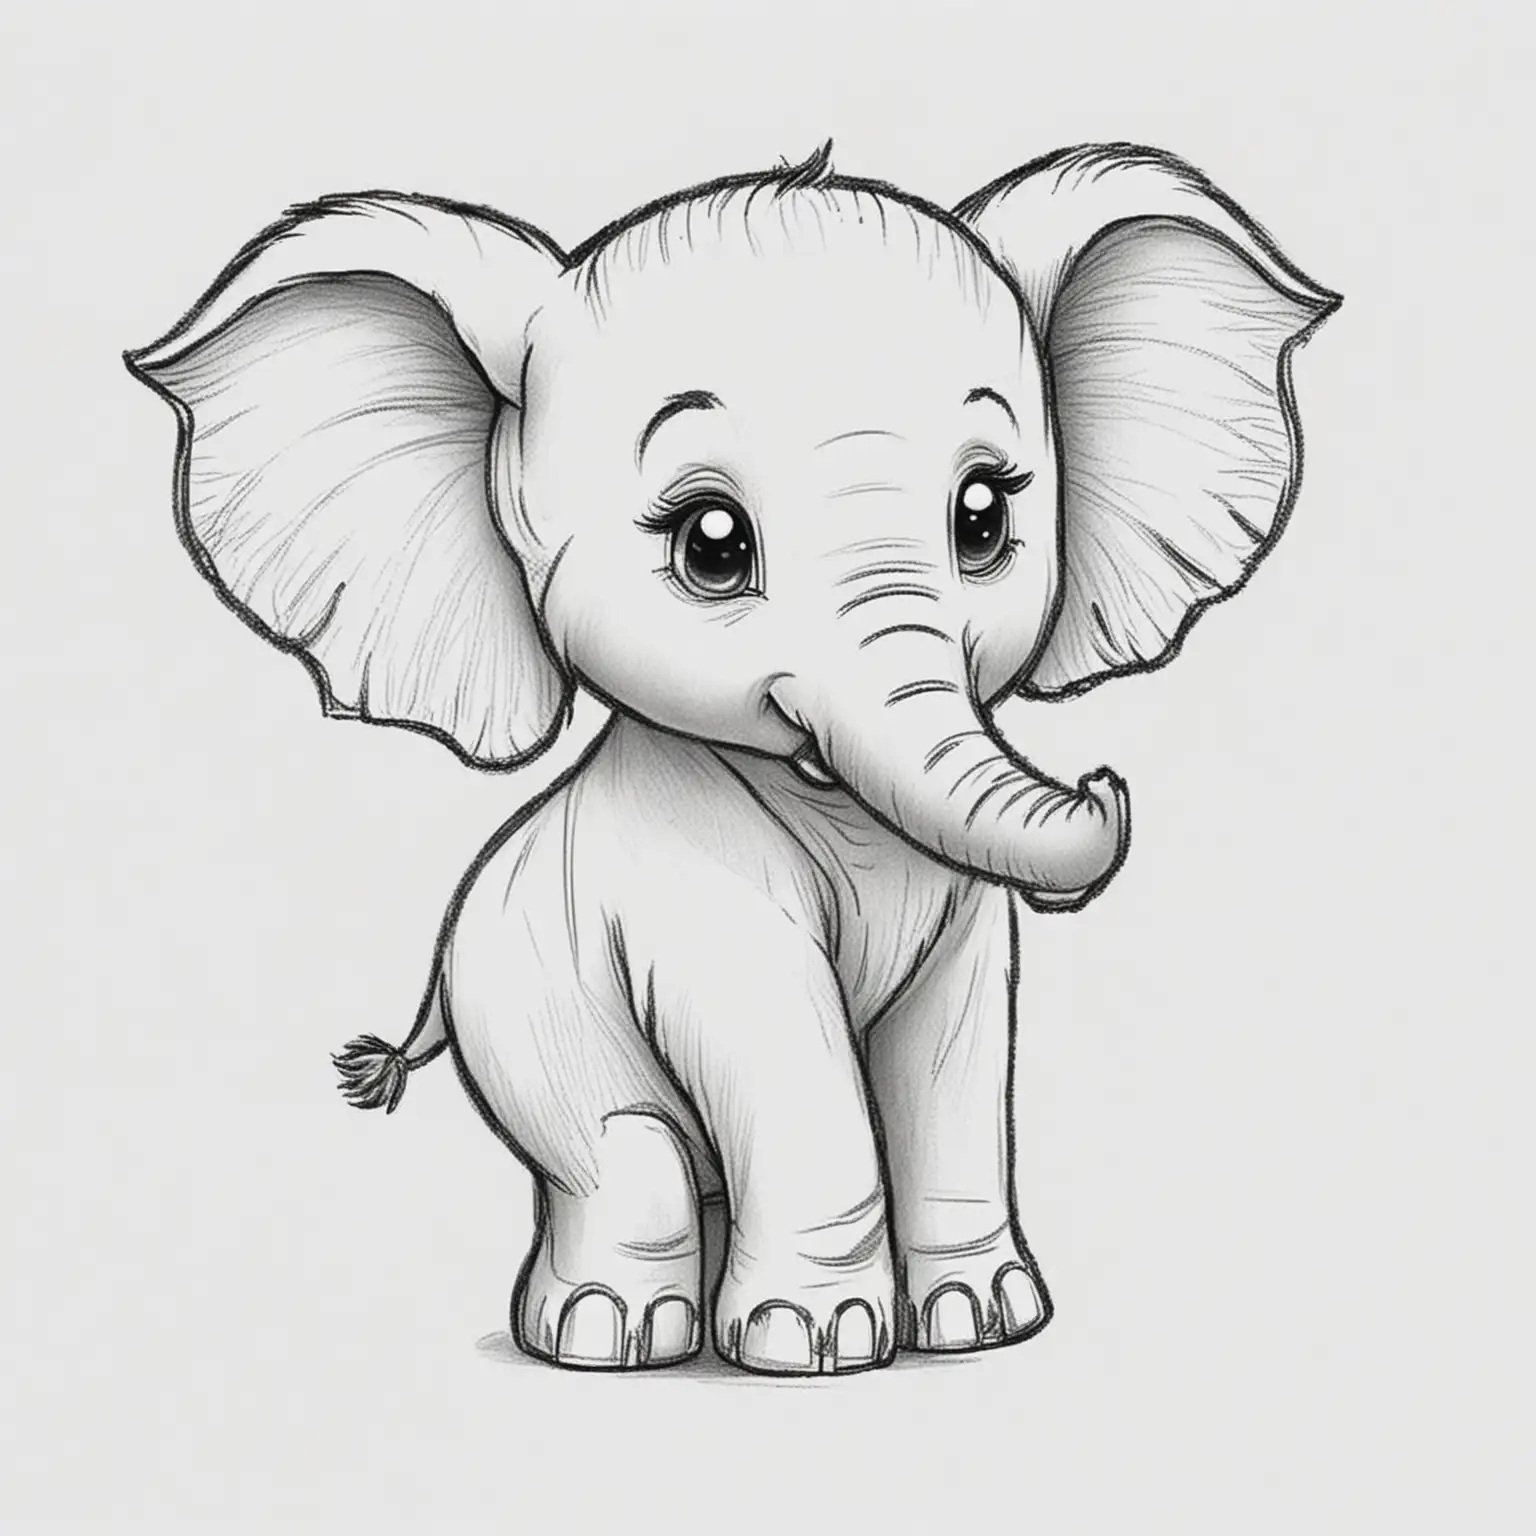 ChildFriendly Elephant Sketch Playful Doodle Drawing